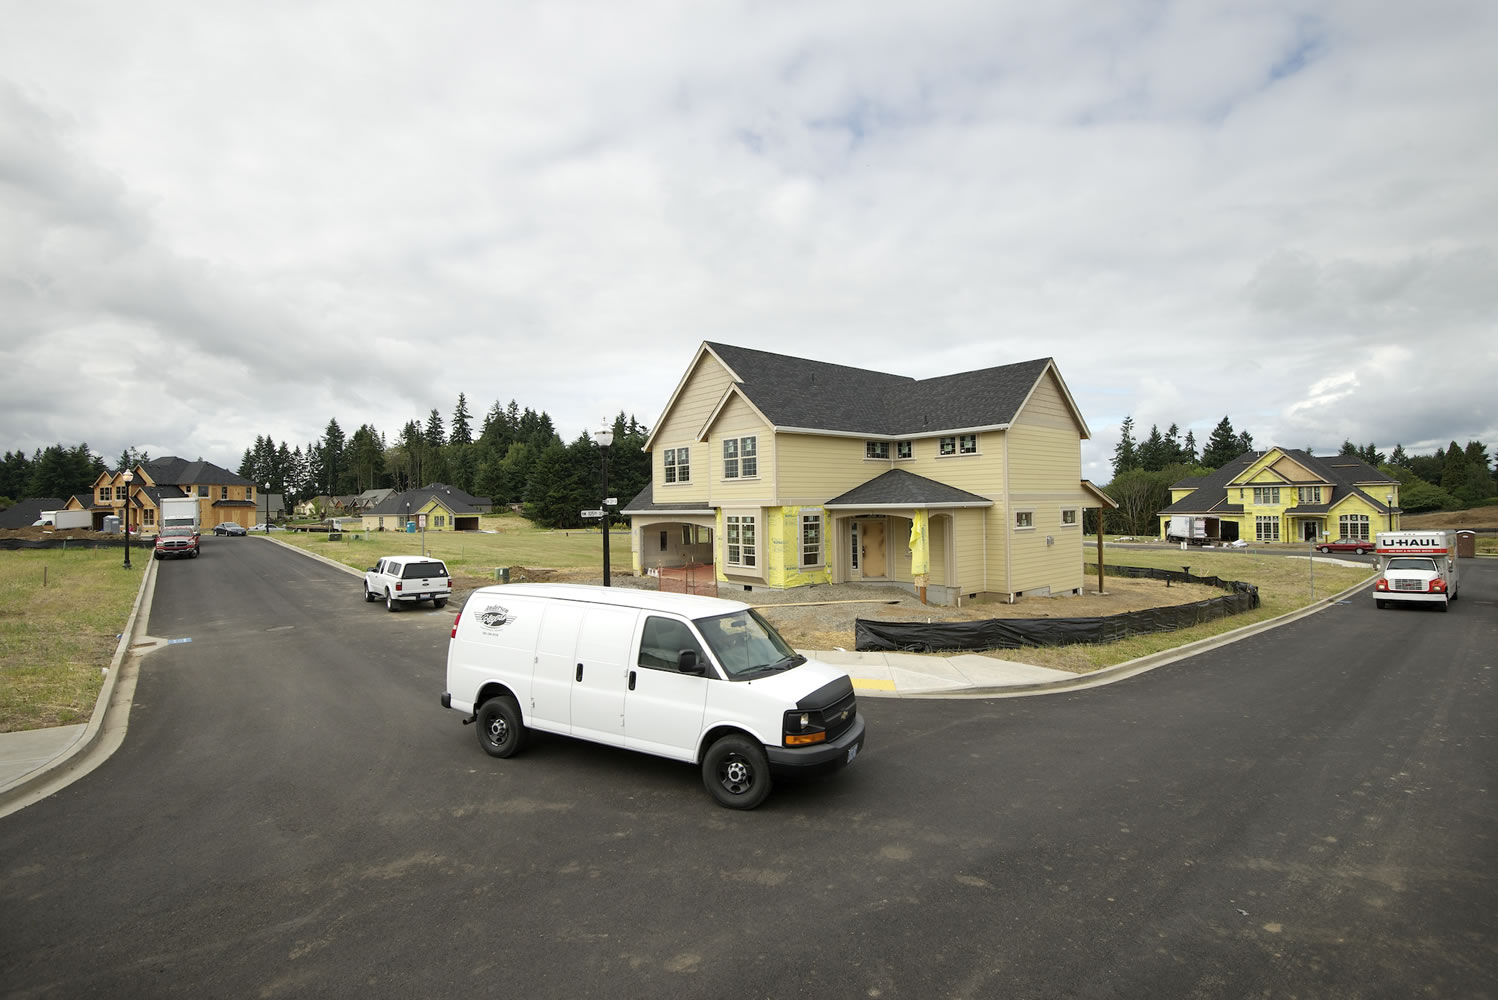 Erickson Farms, a Felida-area subdivision, will host the 2014 NW Natural Parade of Homes, a showcase event sponsored by local homebuilders from the Building Industry Association of Clark County.